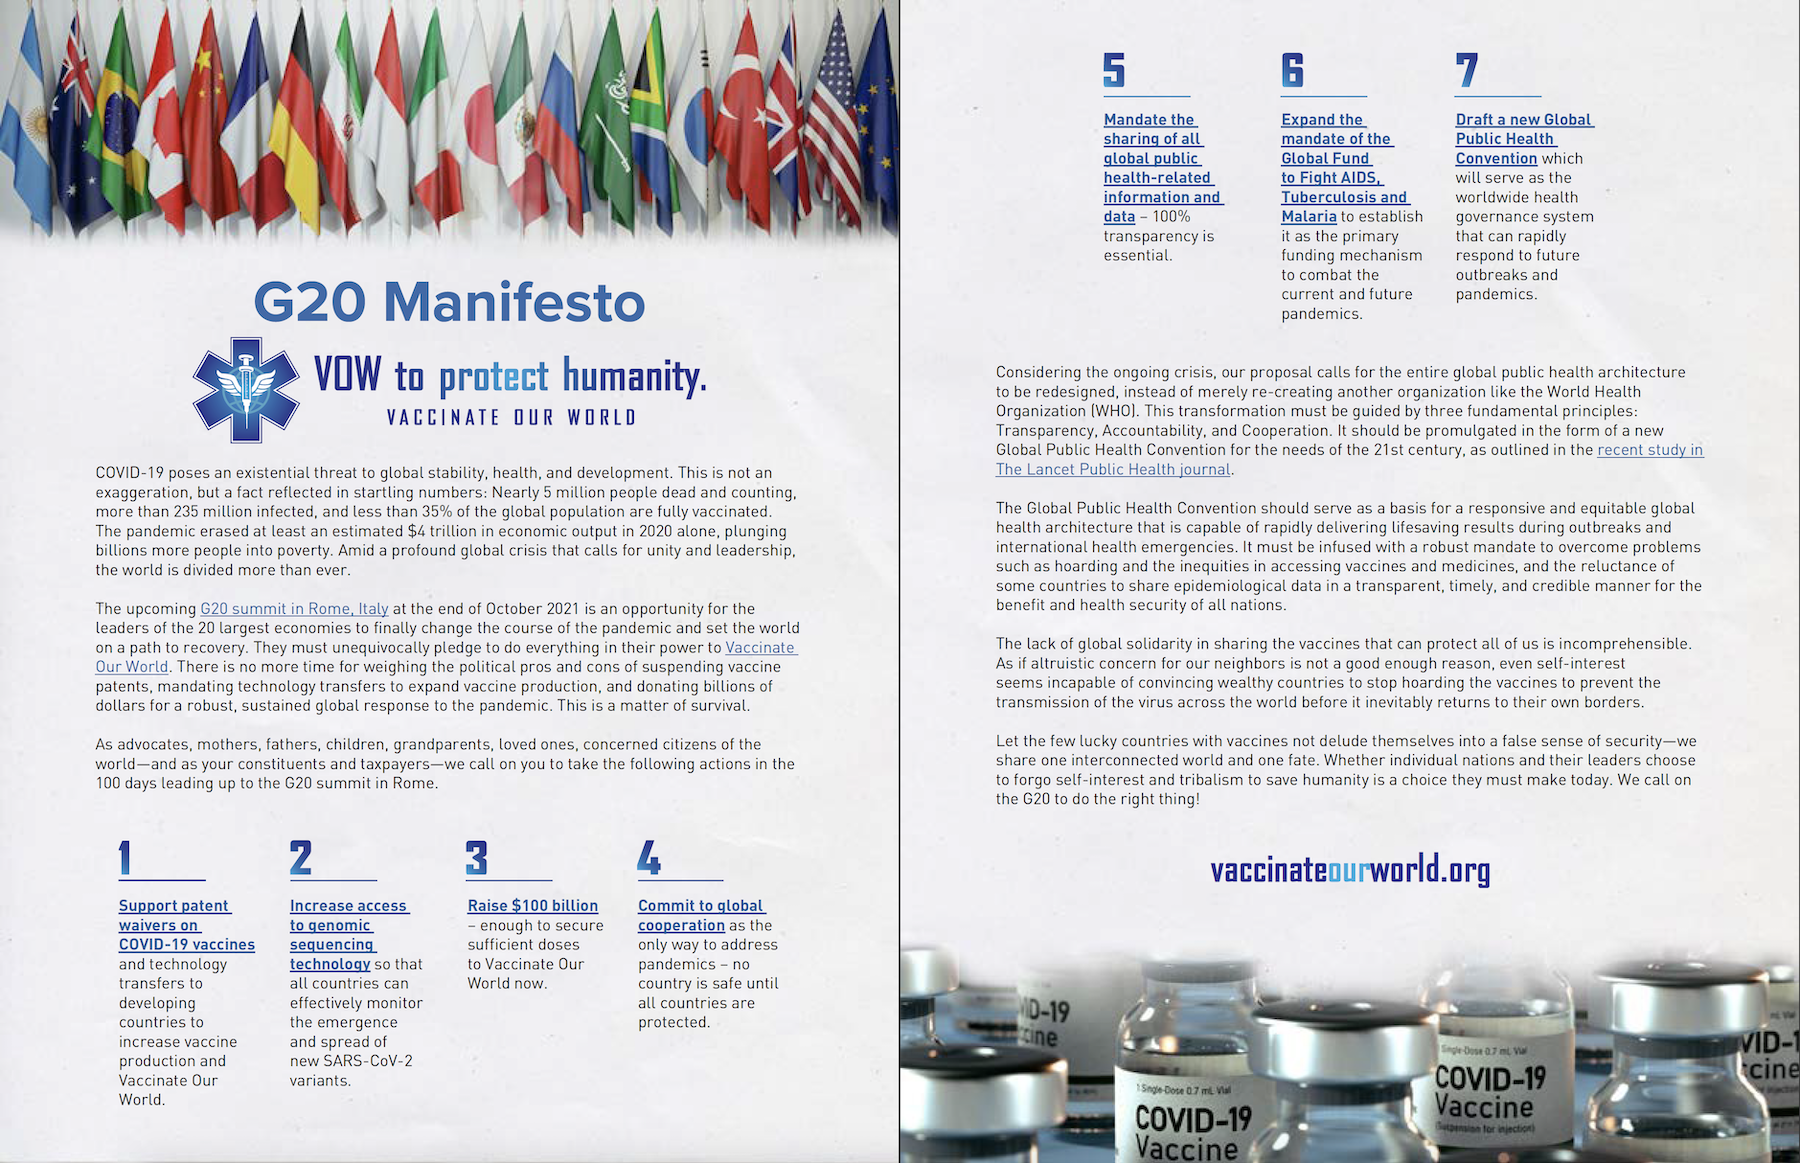 24 Days to G20 Summit – Seven actions to end the pandemic: The G20 Manifesto